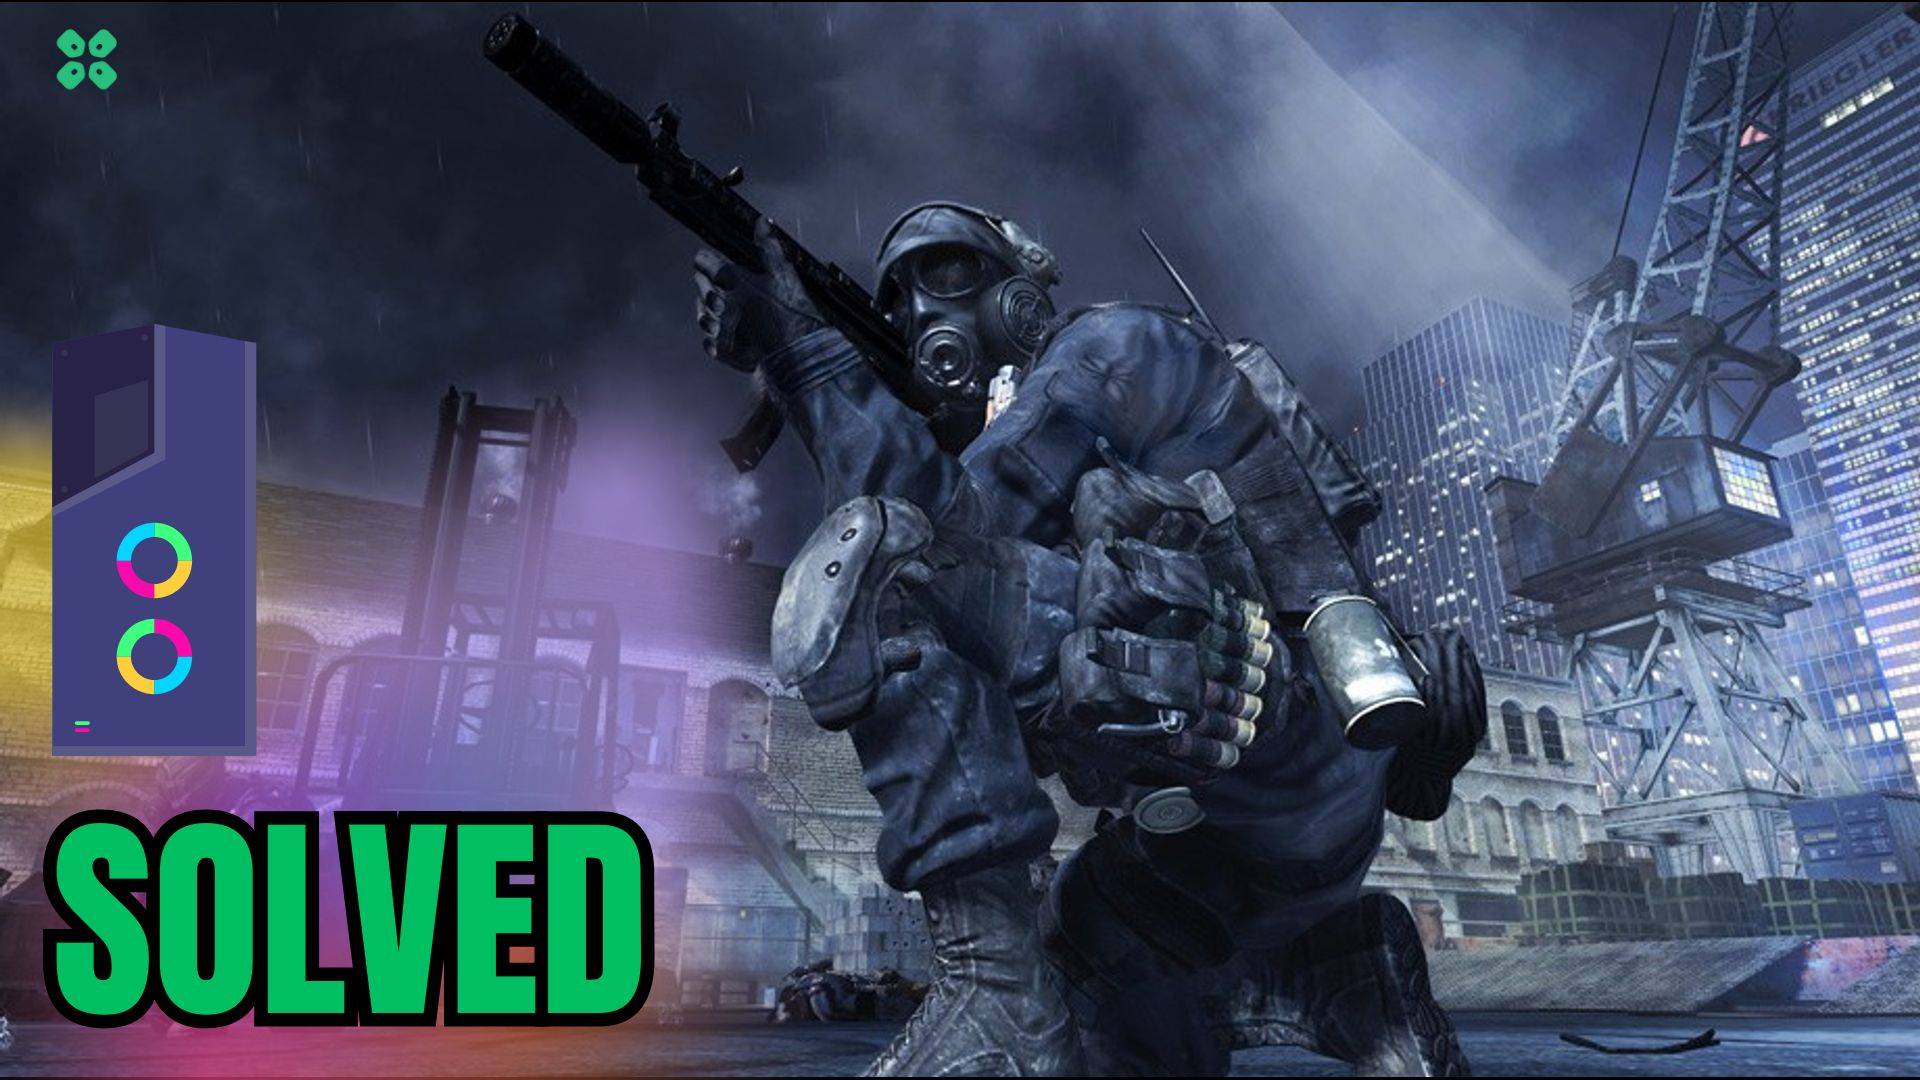 Artwork of Call of Duty Modern Warfare 3 and its fix of crashing by TCG